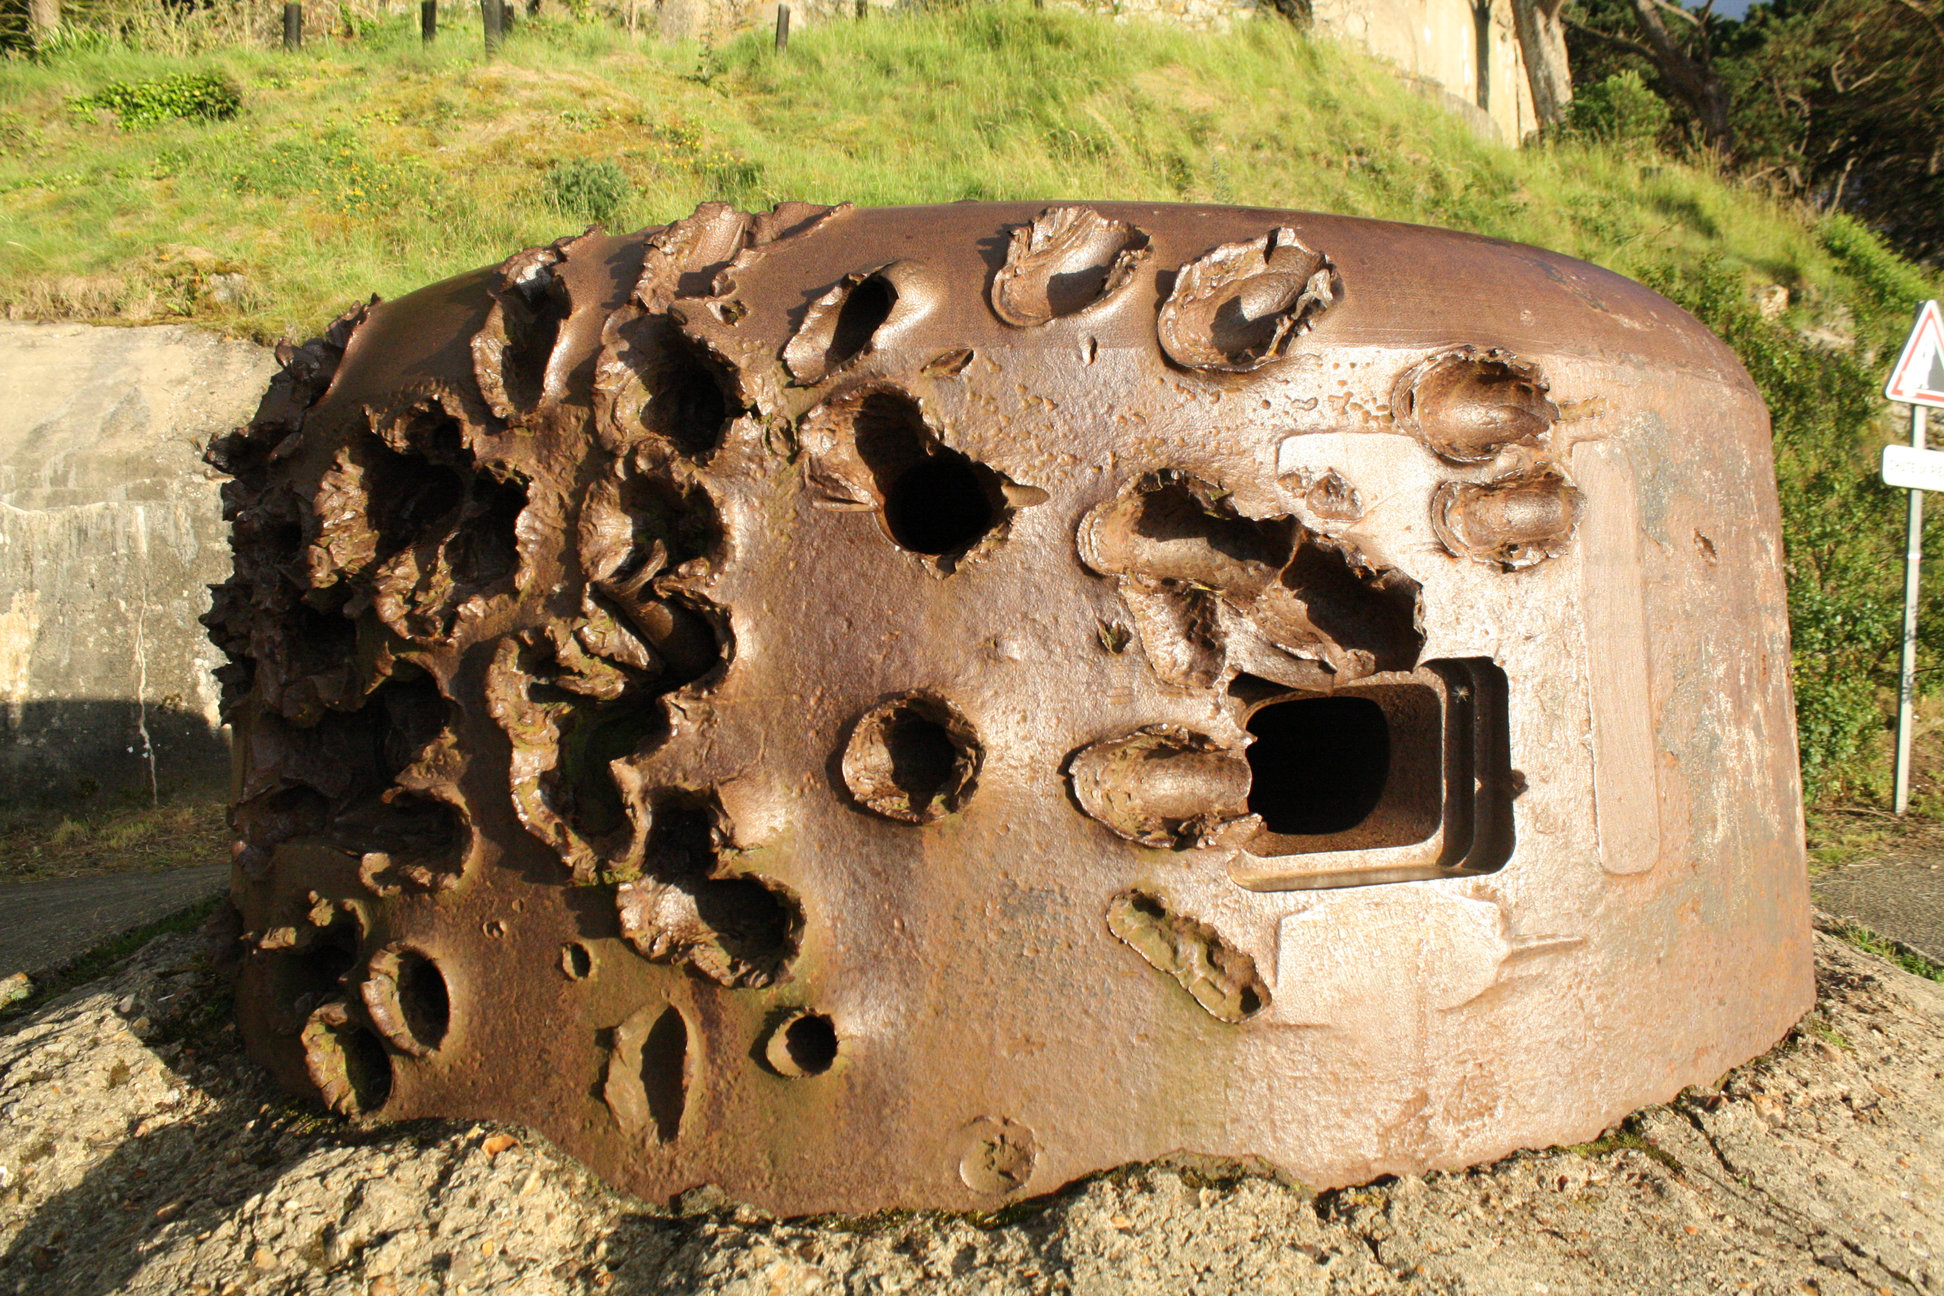 A German gun turret from WWII in France that clearly received some heavy attacking fire.